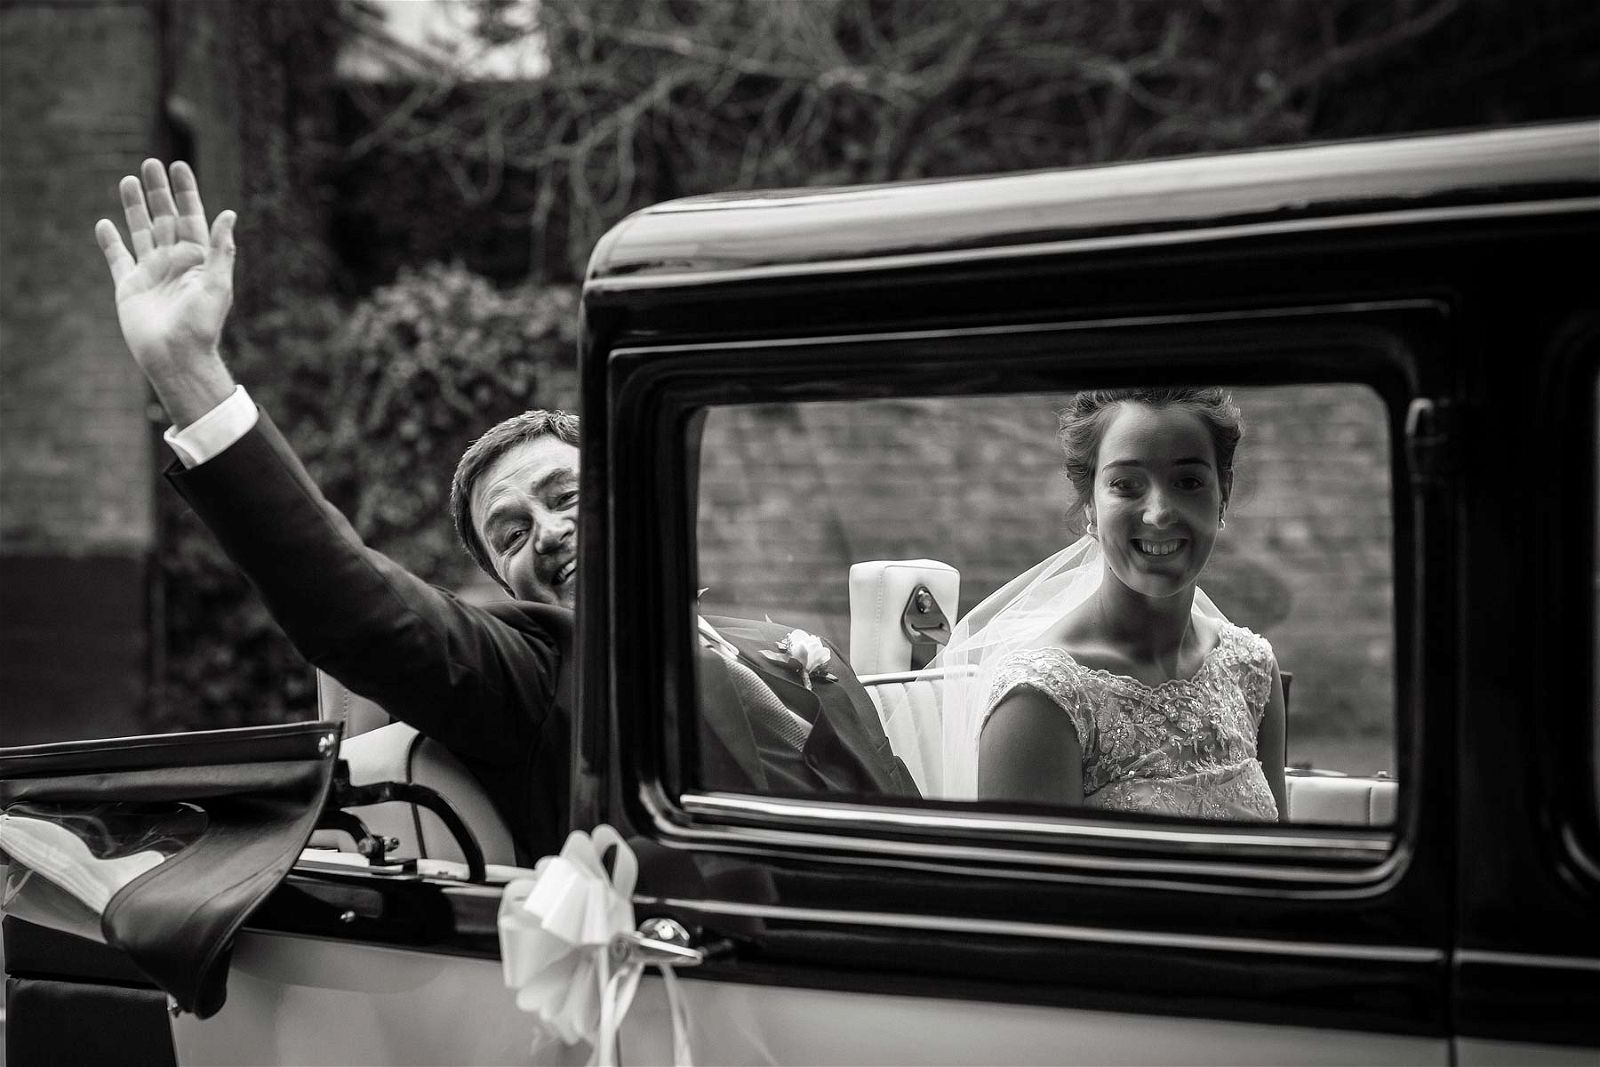 Relaxed fun arrival of the Bride and her father to St Chads Church in Pattingham by Pattingham Wedding Photographer Stuart James